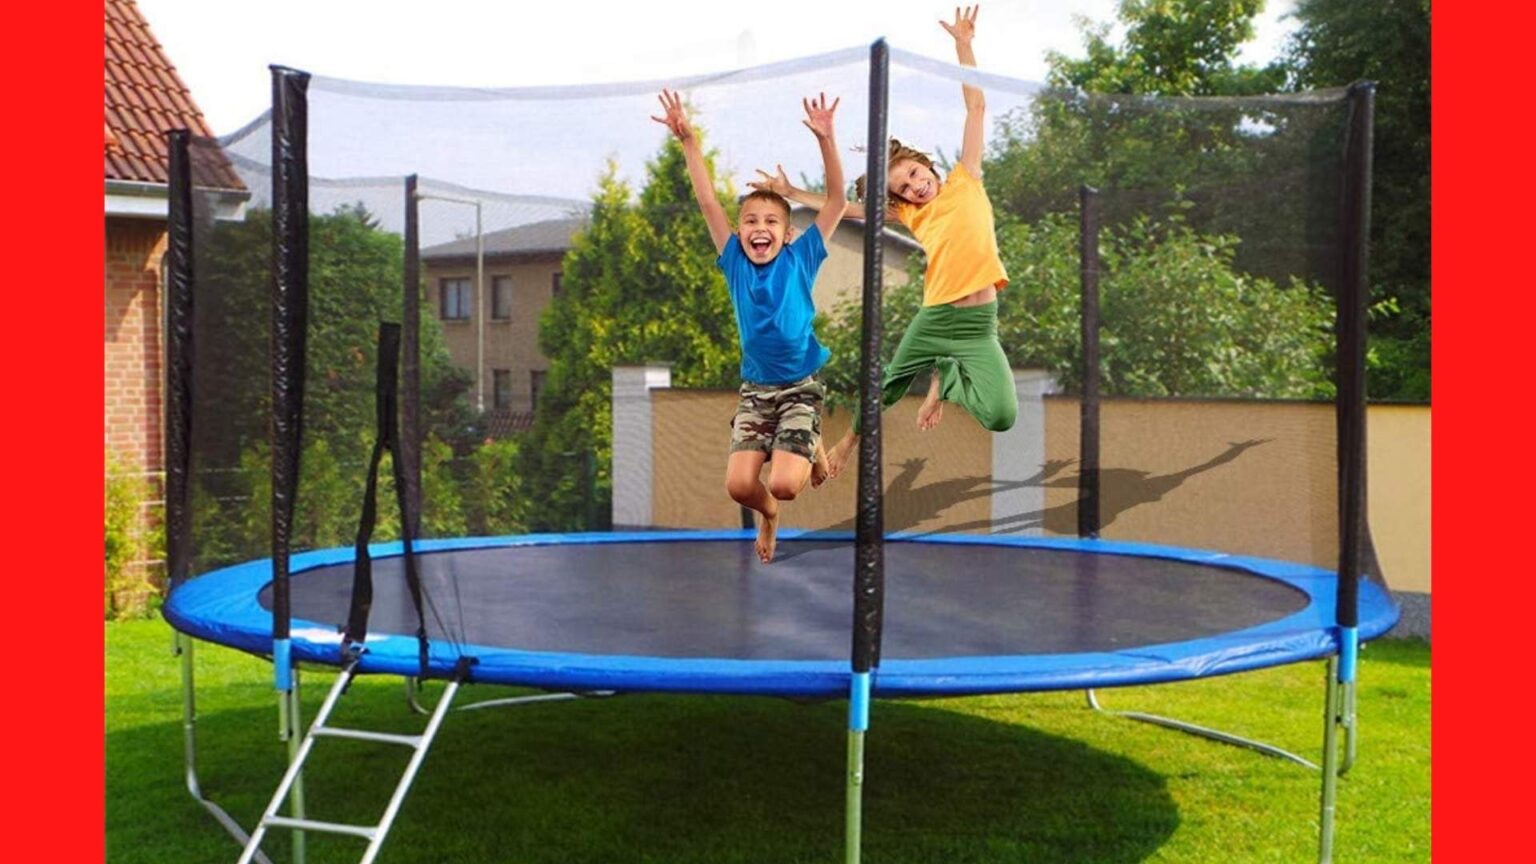 The Backyard Leisure Guys – fun at home with the kids activities